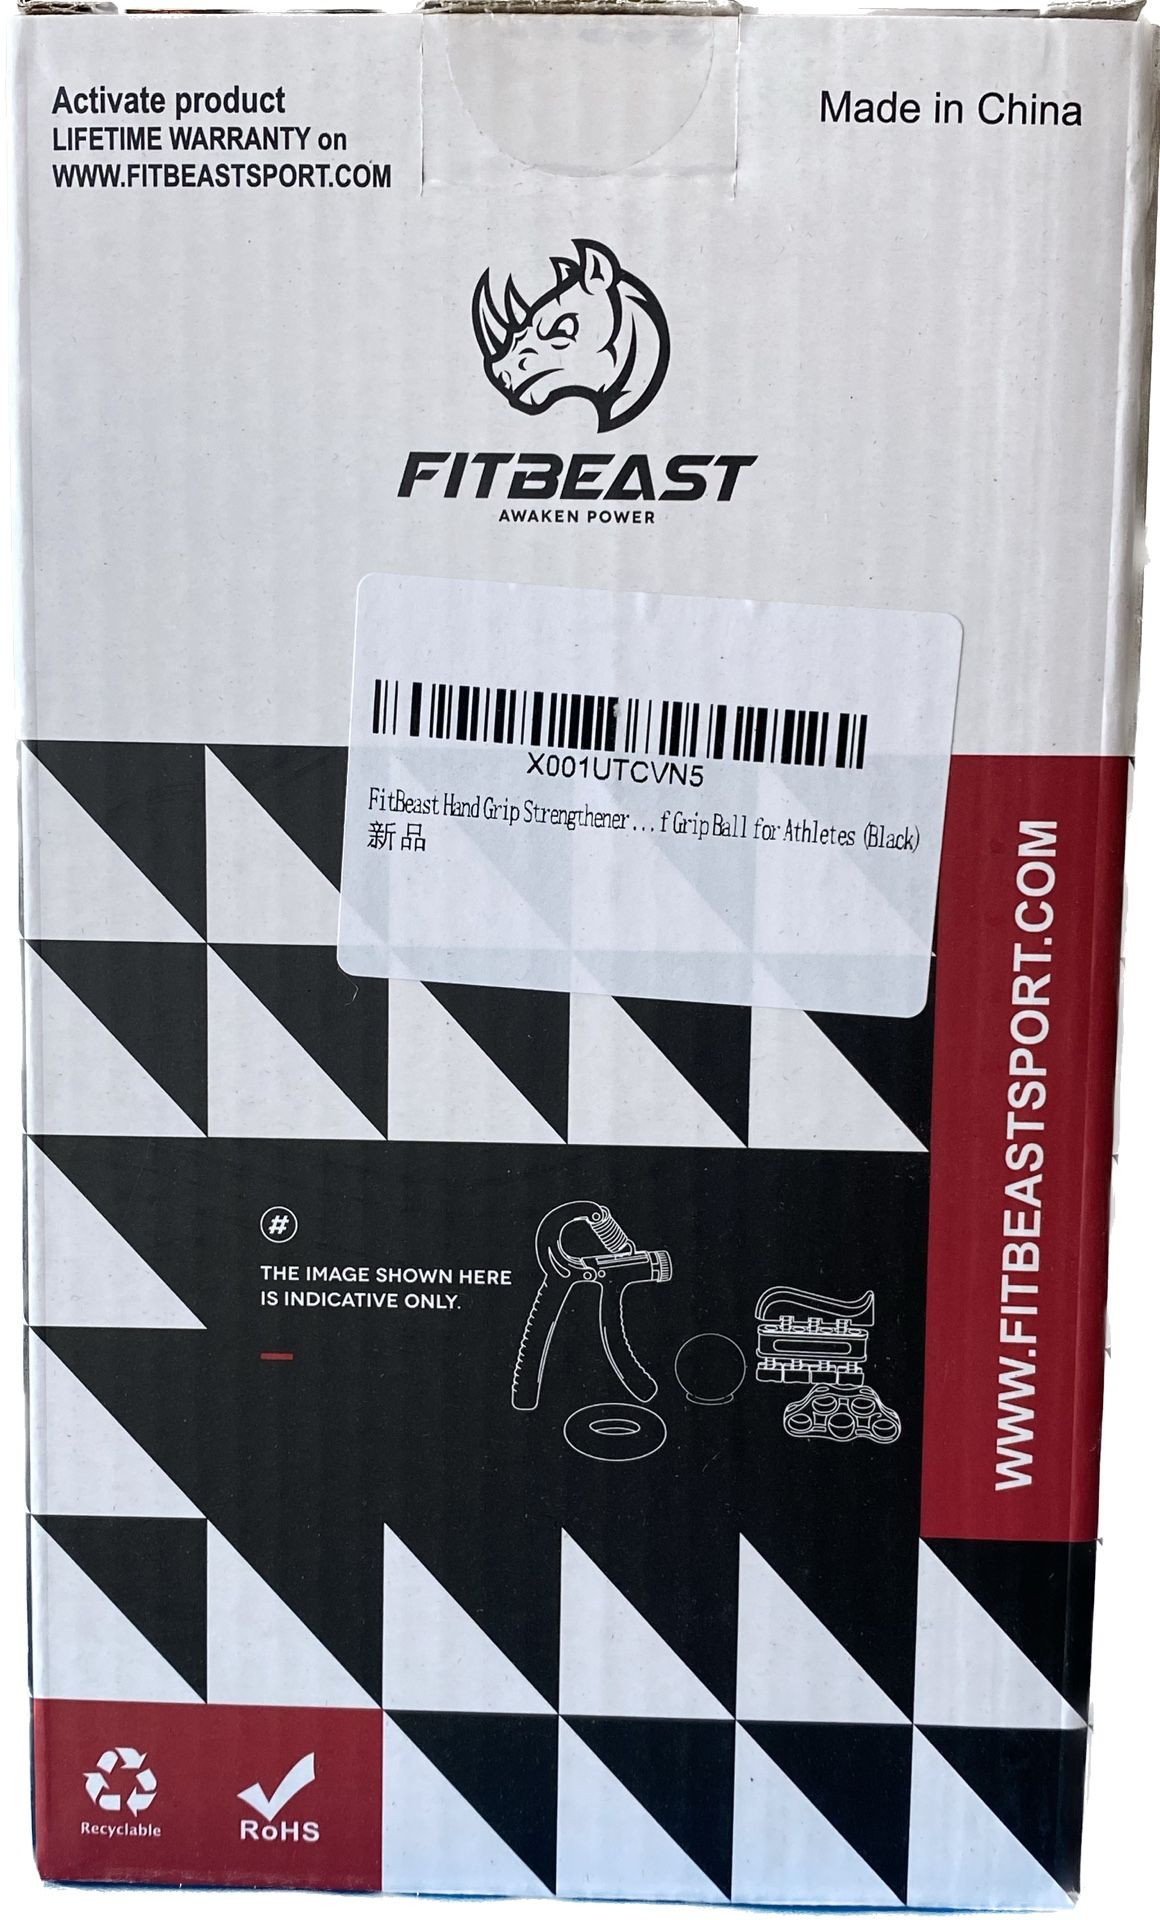 Fitbeast Hand Excercise Set 5pcs Review - Awaken your Power 